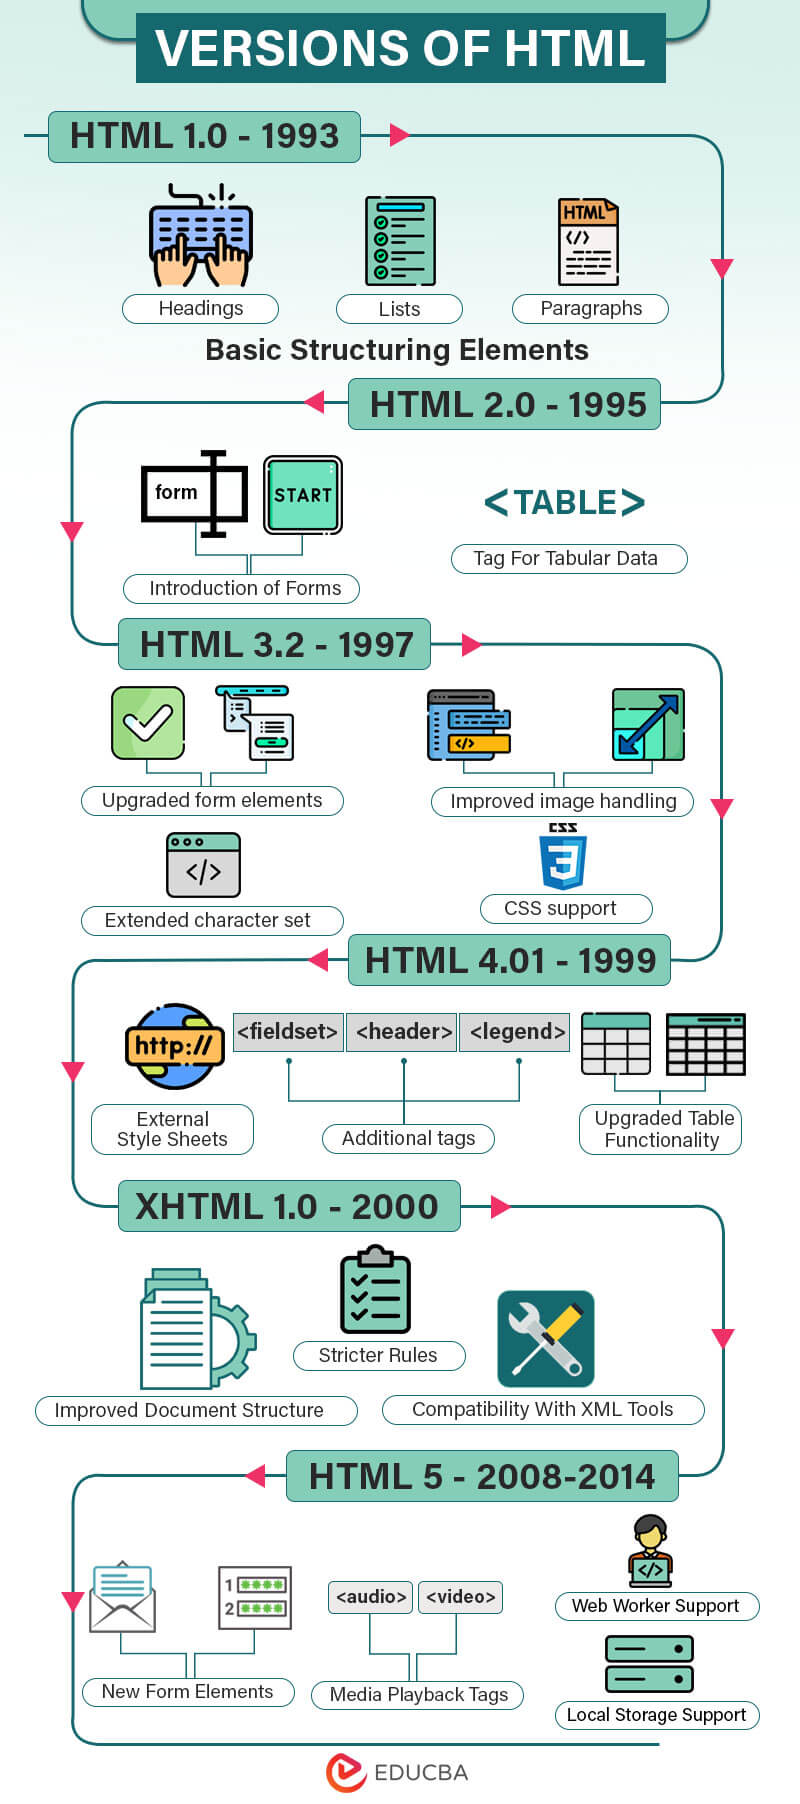 Versions-of-HTML-Infographic